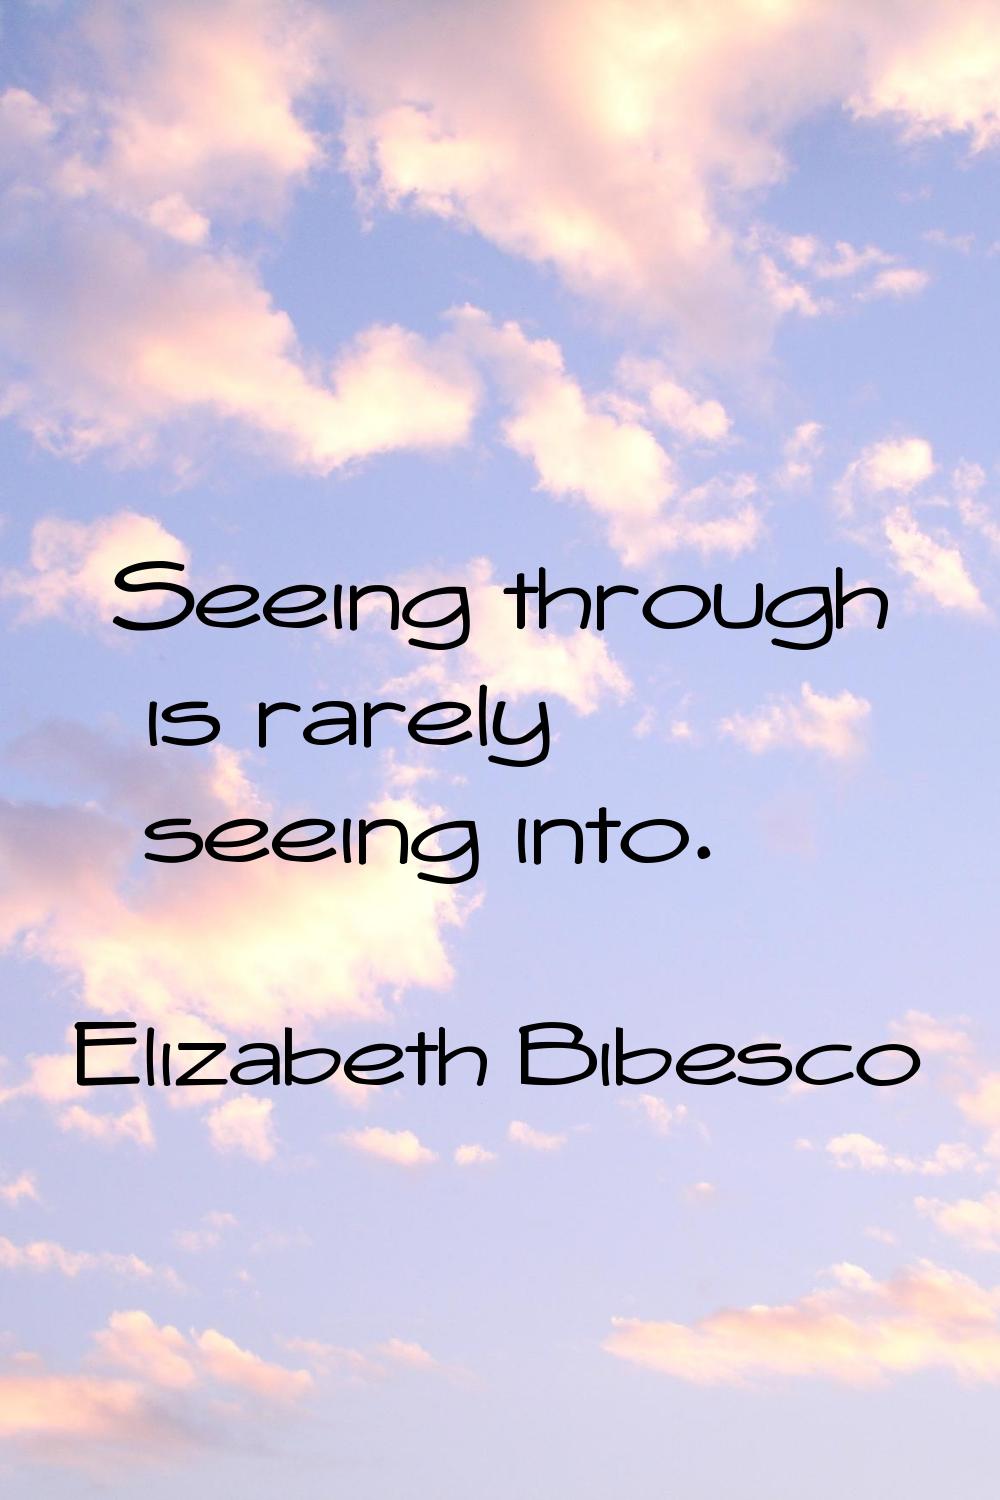 Seeing through is rarely seeing into.